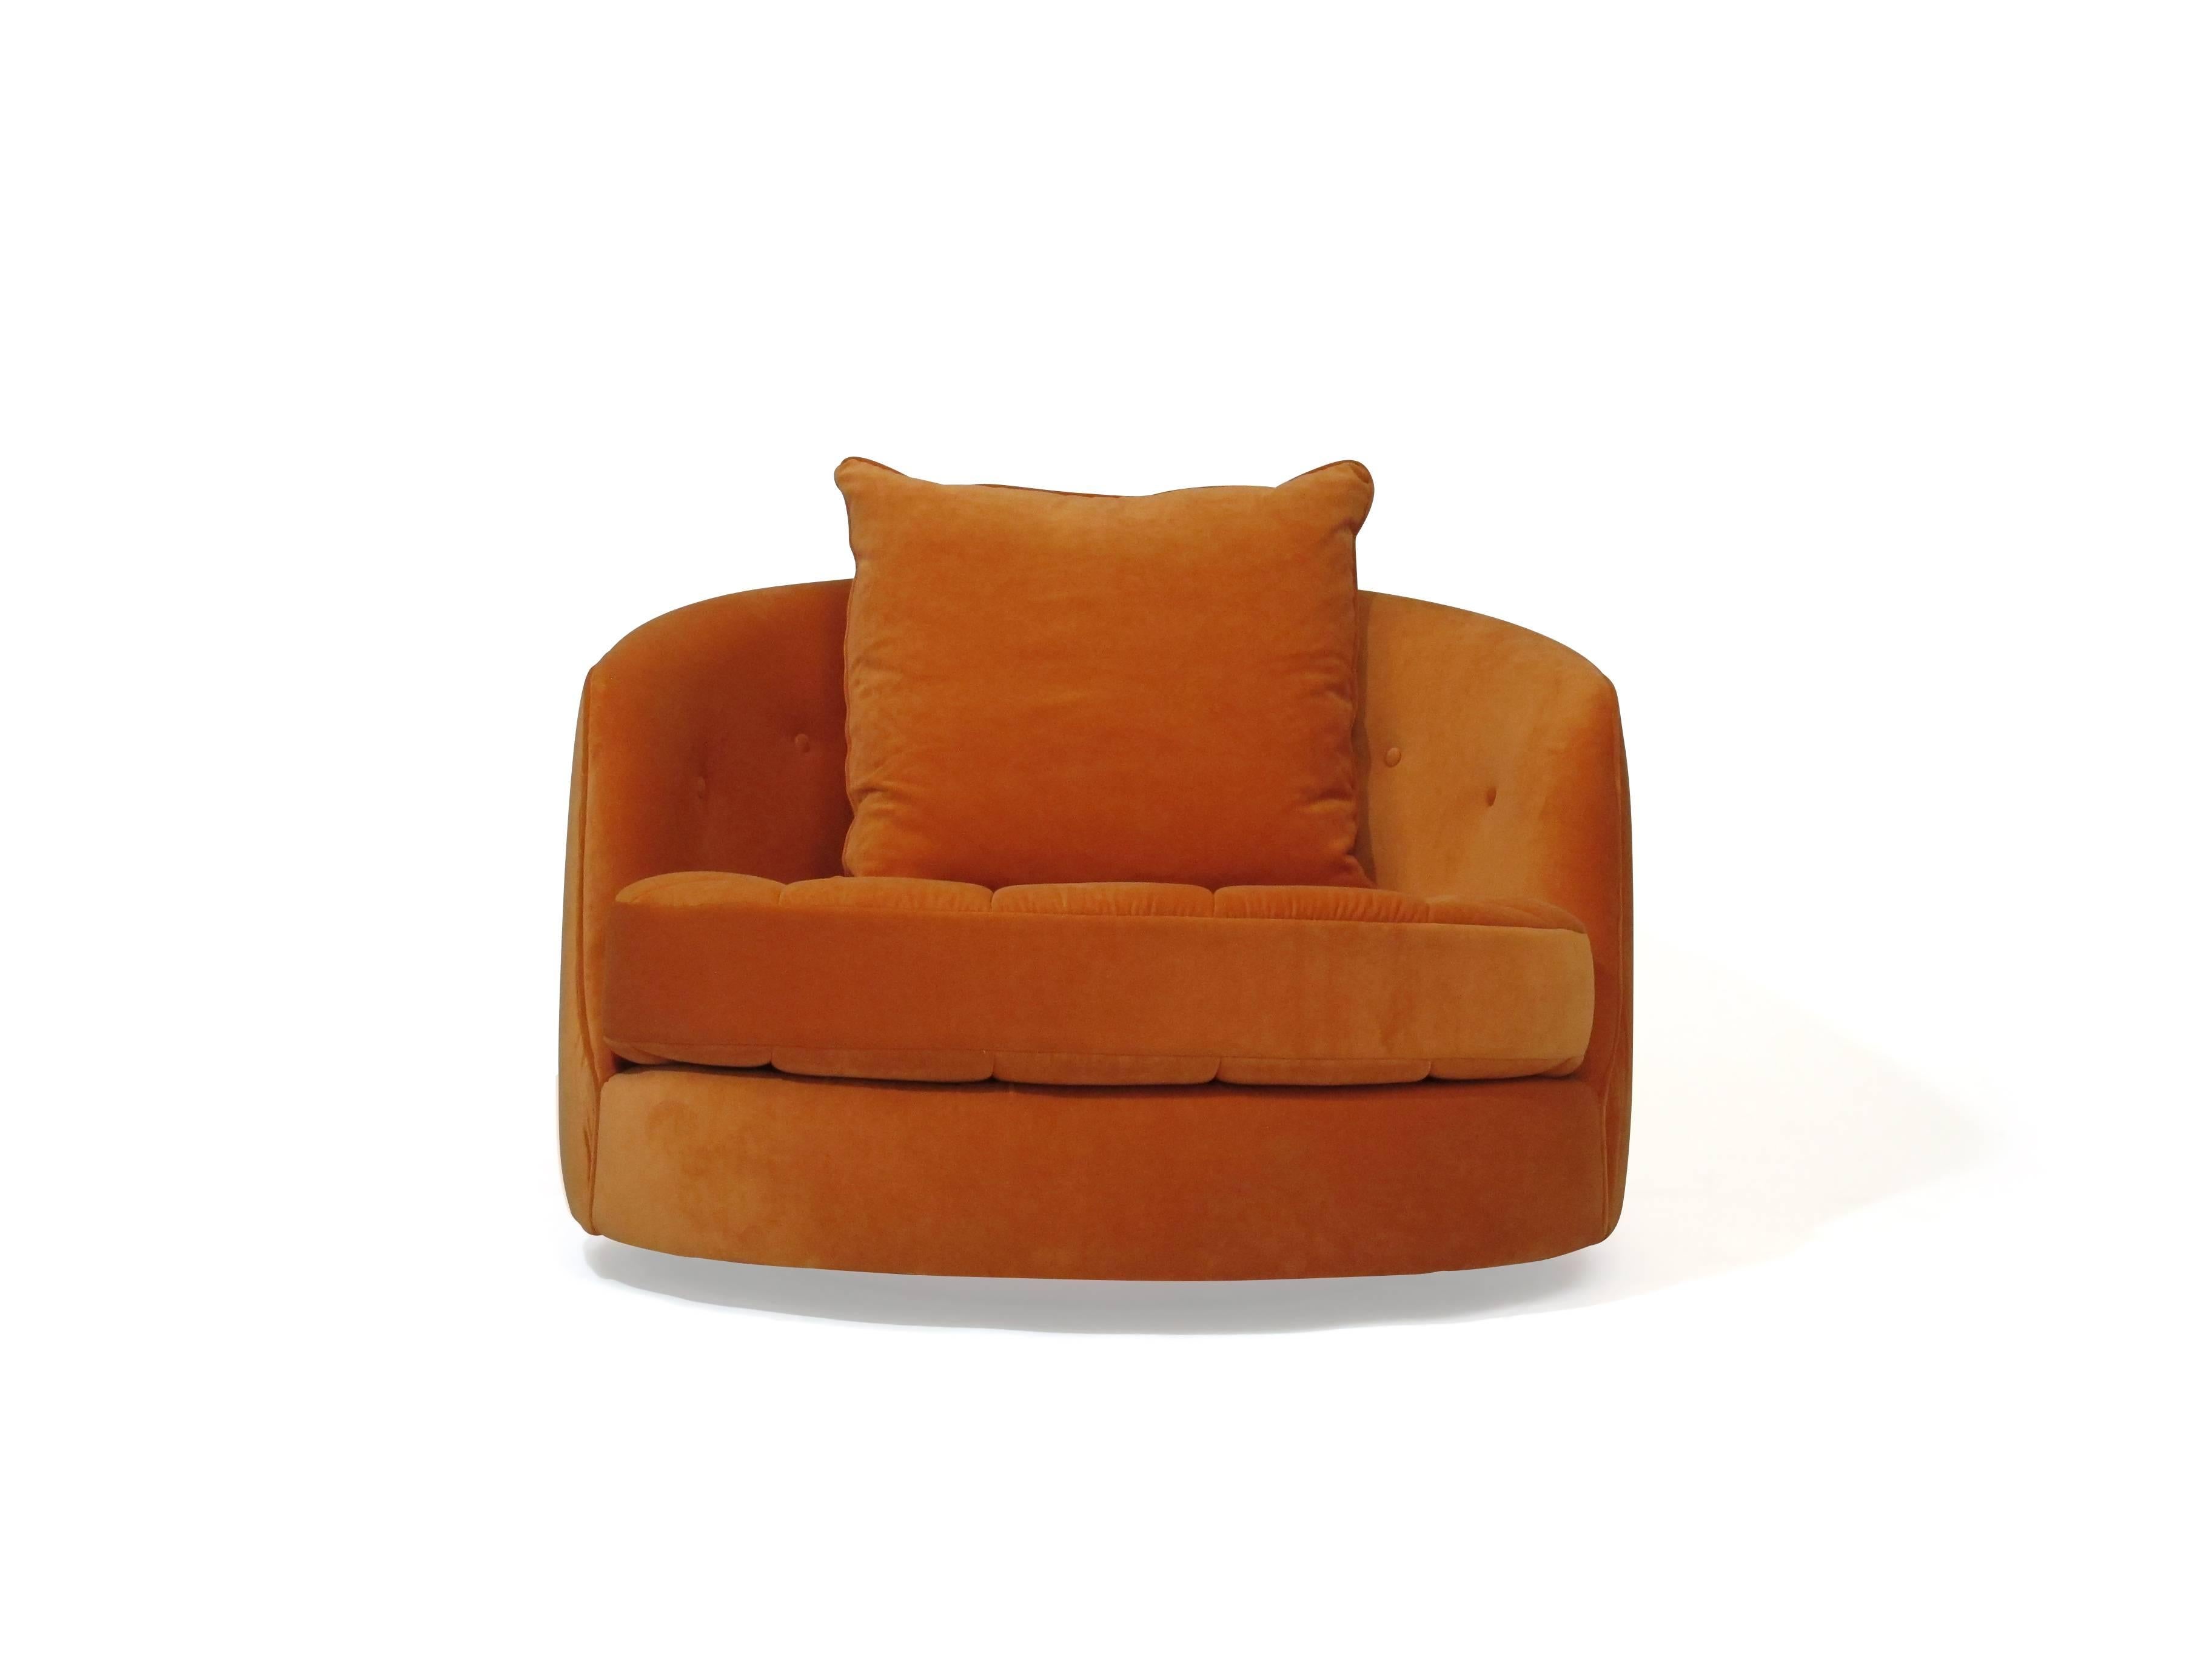 American Milo Baughman for Thayer Coggin Swivel Tub Chair Available in COM For Sale